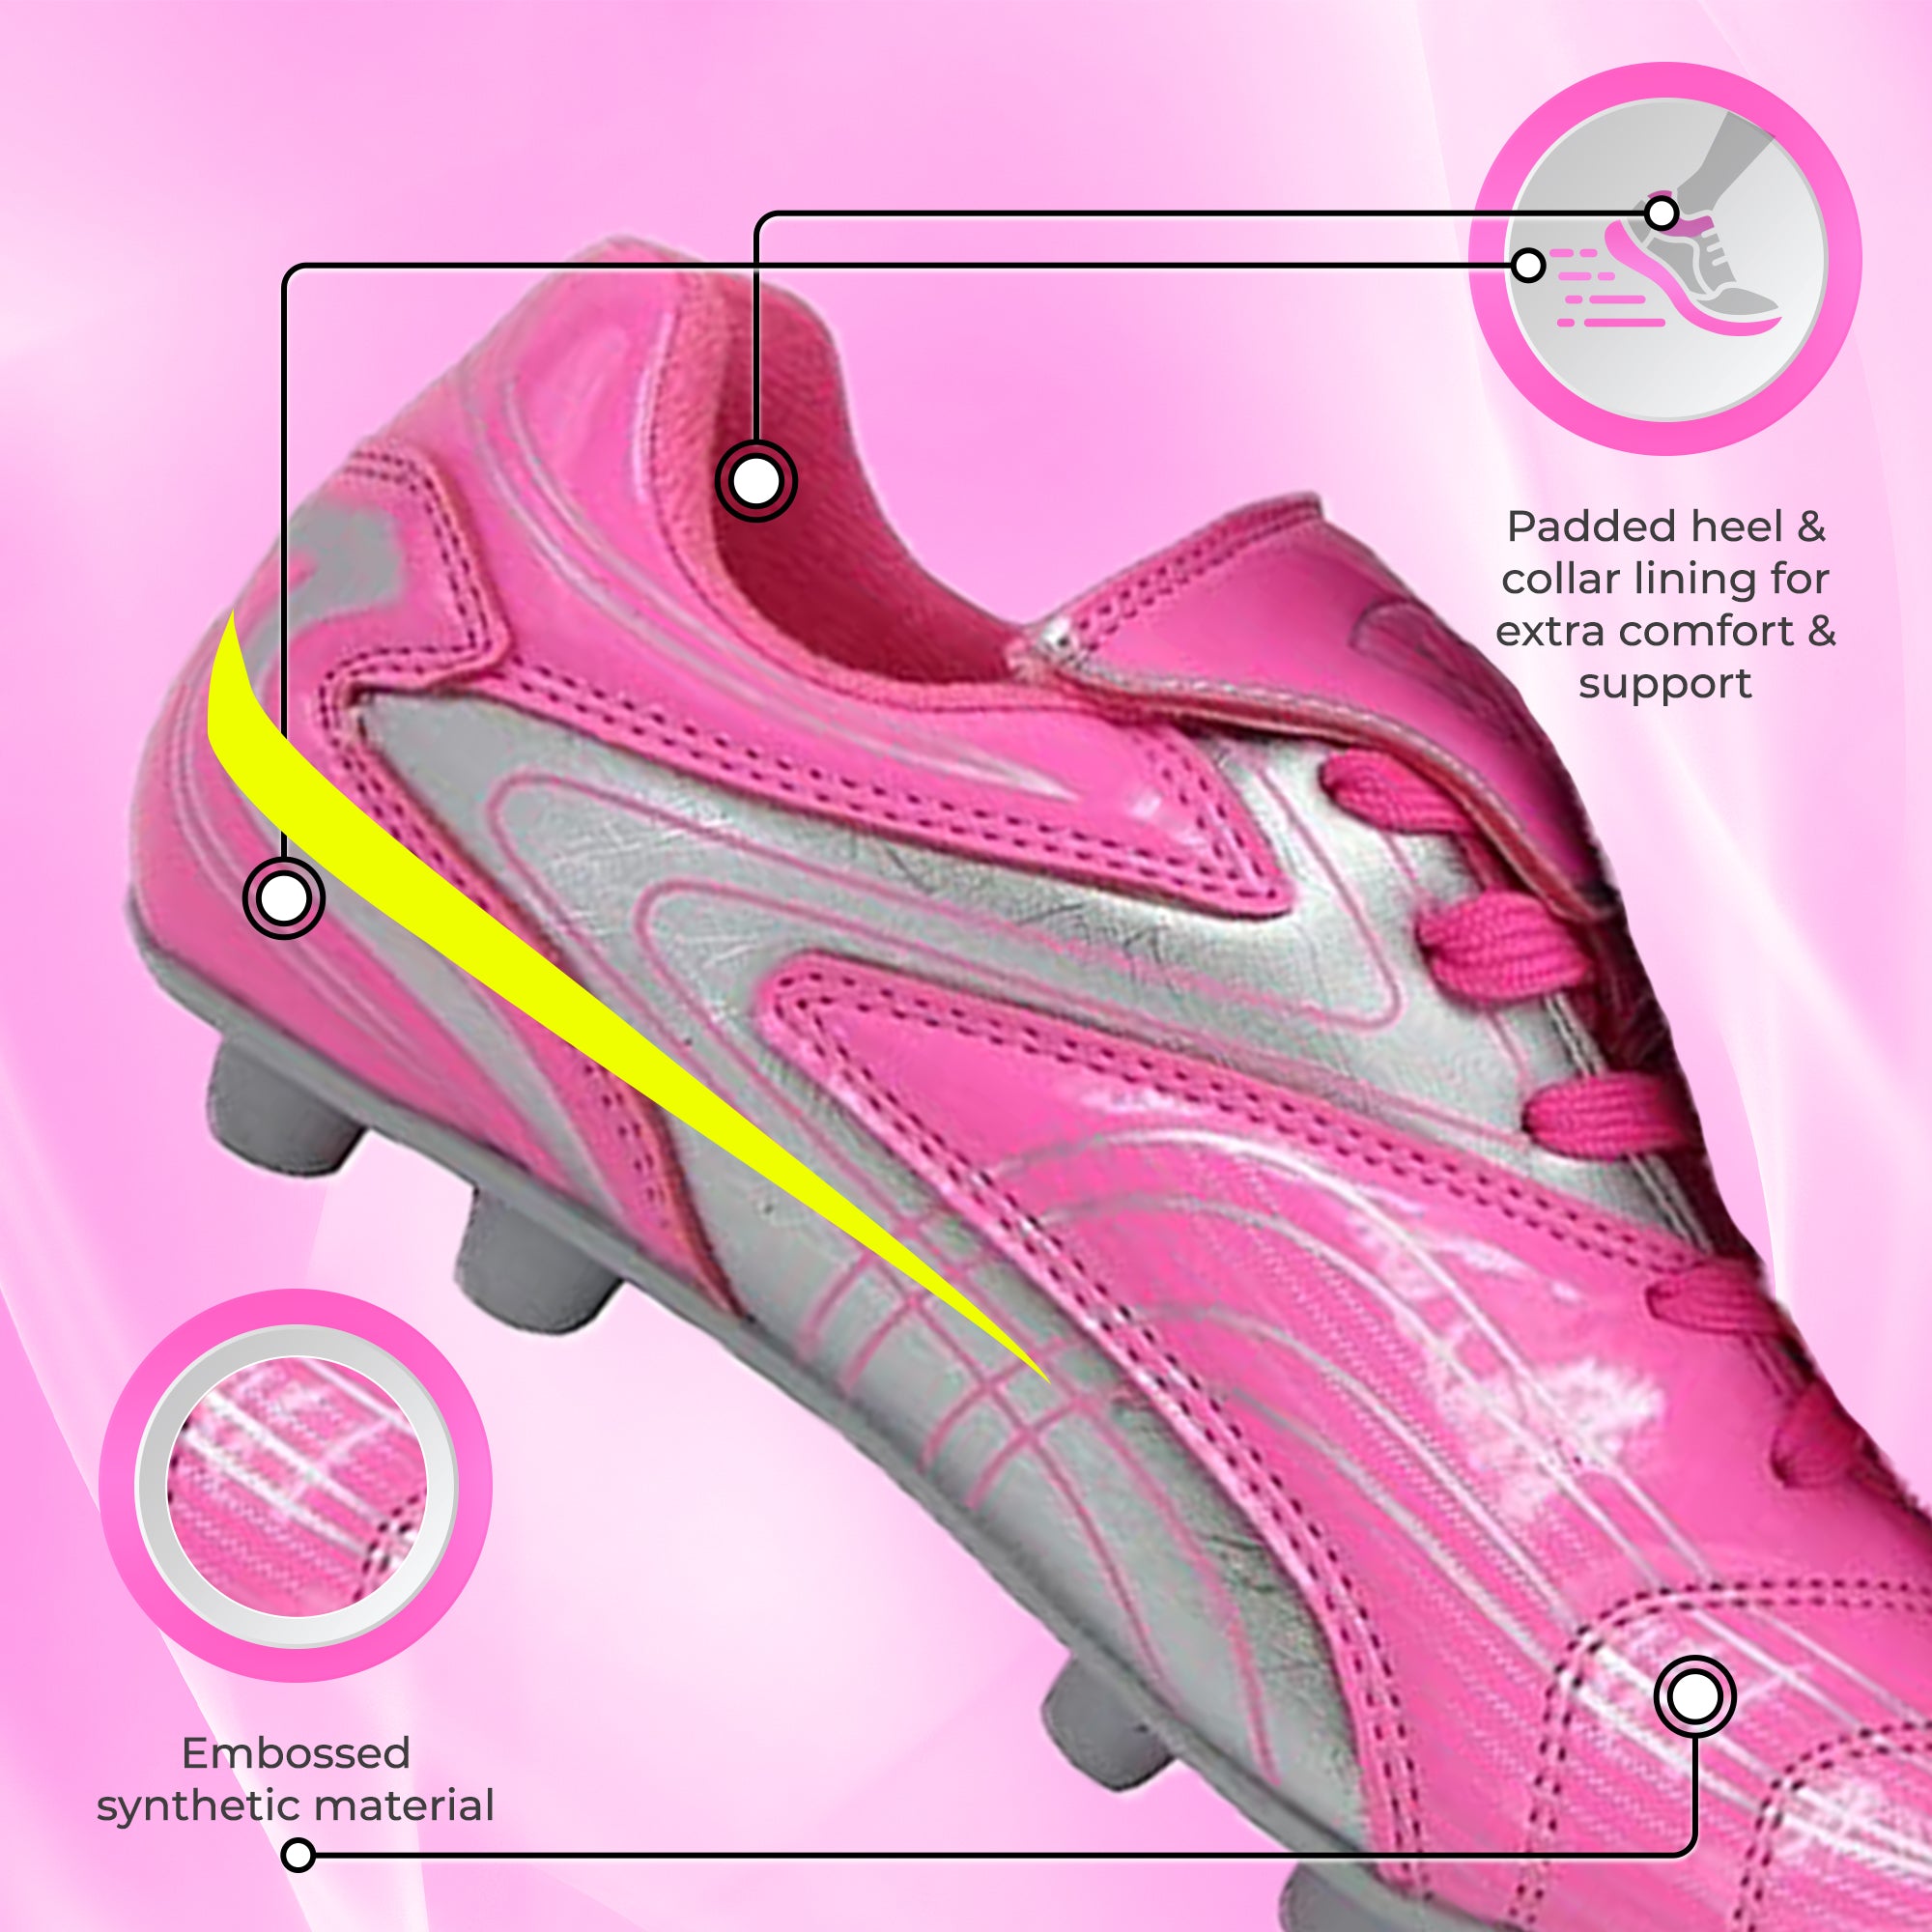 Striker Firm Ground Soccer Shoes - Pink/Silver